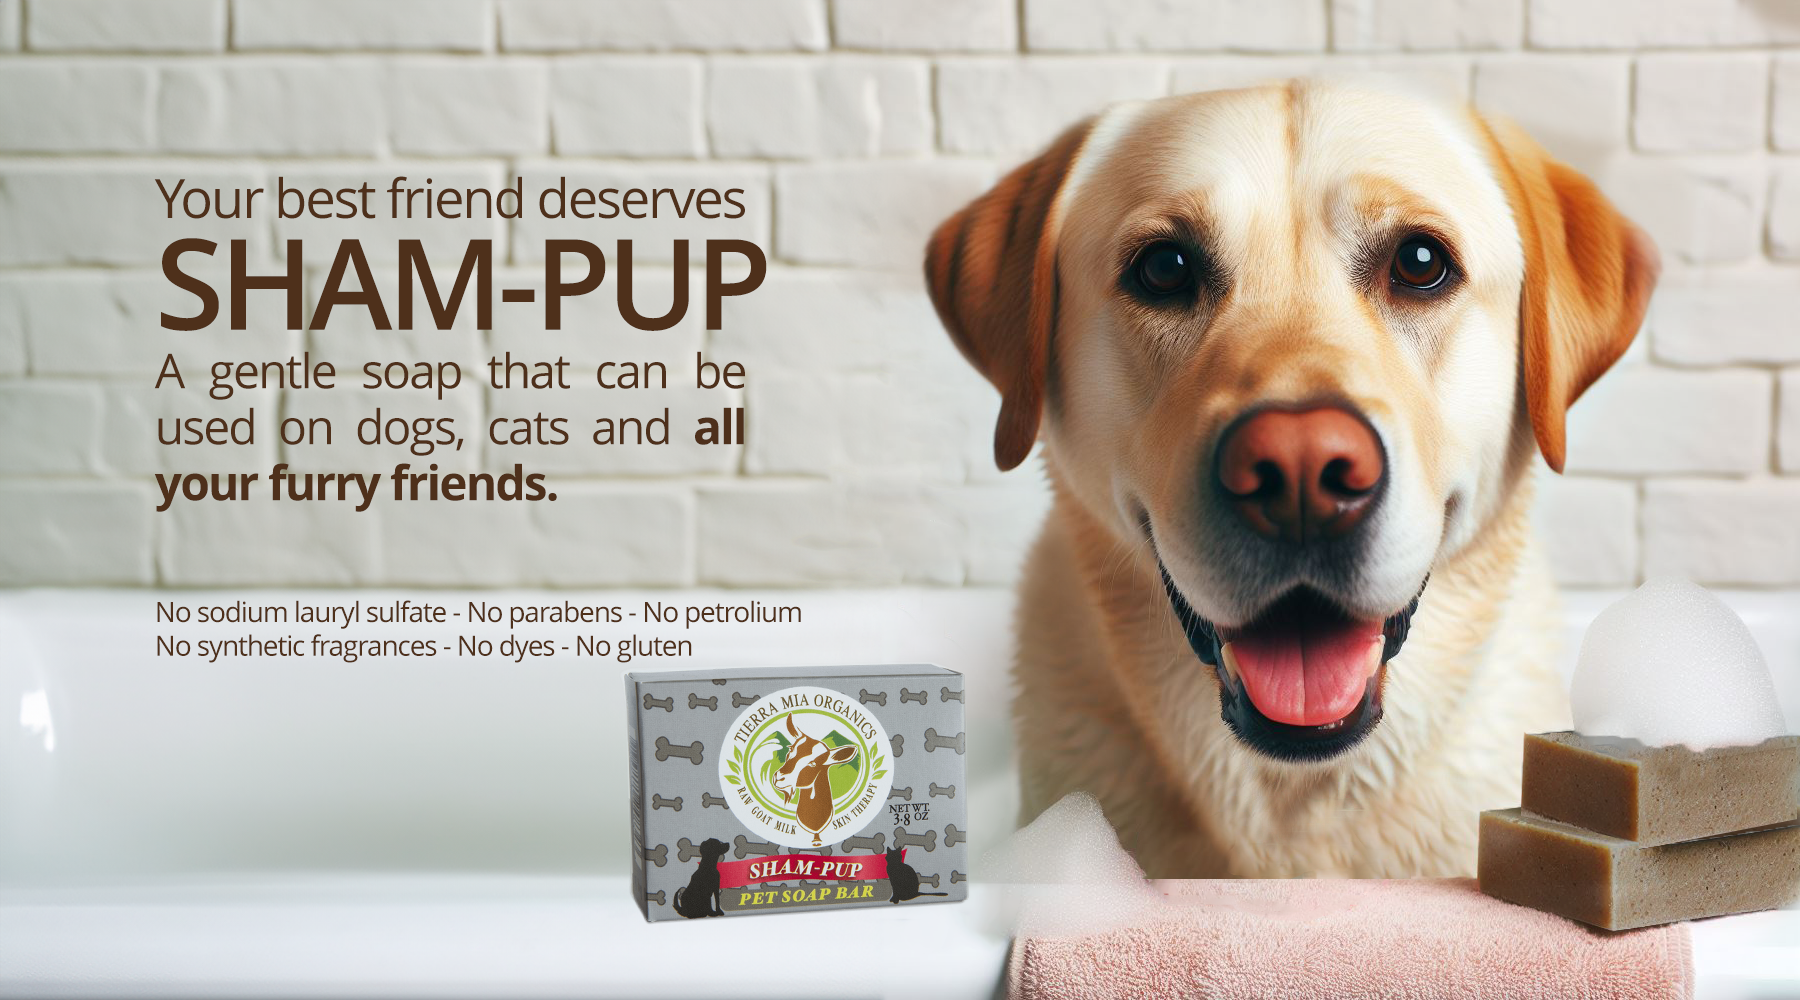 golden labrador retreiver in a bath tub with two soap bars and a packaged soap bar of Sham-pup pet soap bar